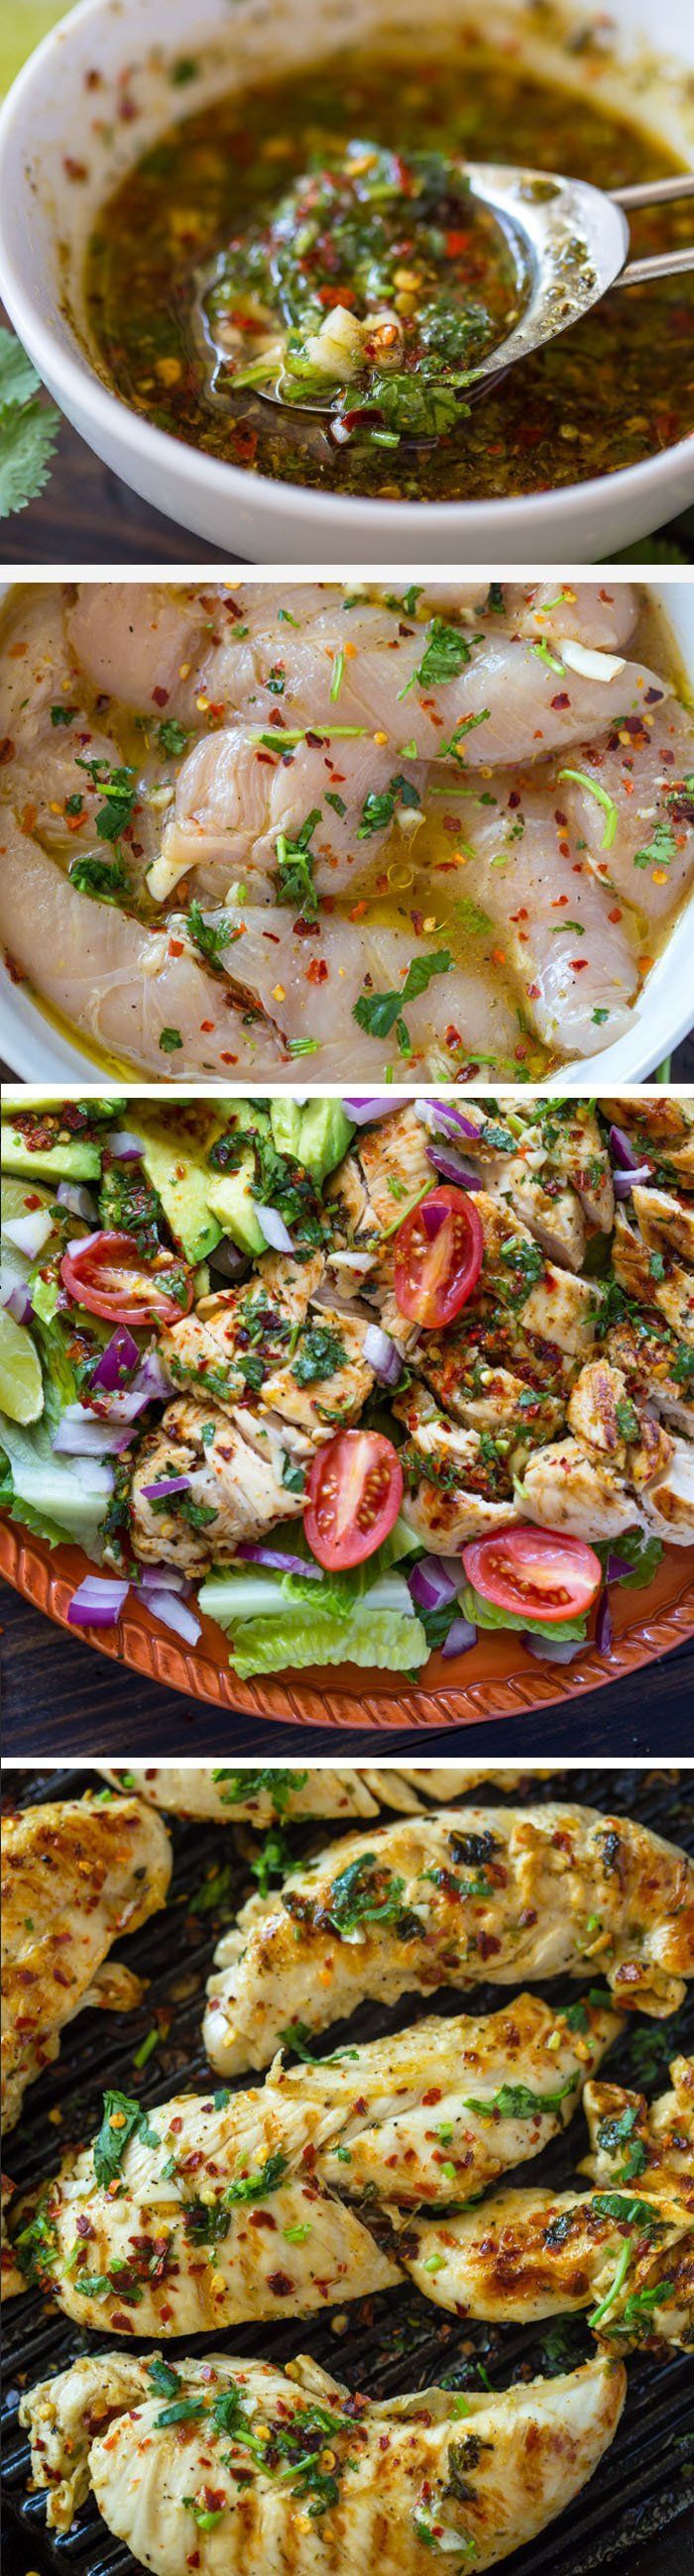 Easy Chili Cilantro Lime Chicken is salty, sweet, sour, and spicy and is great on